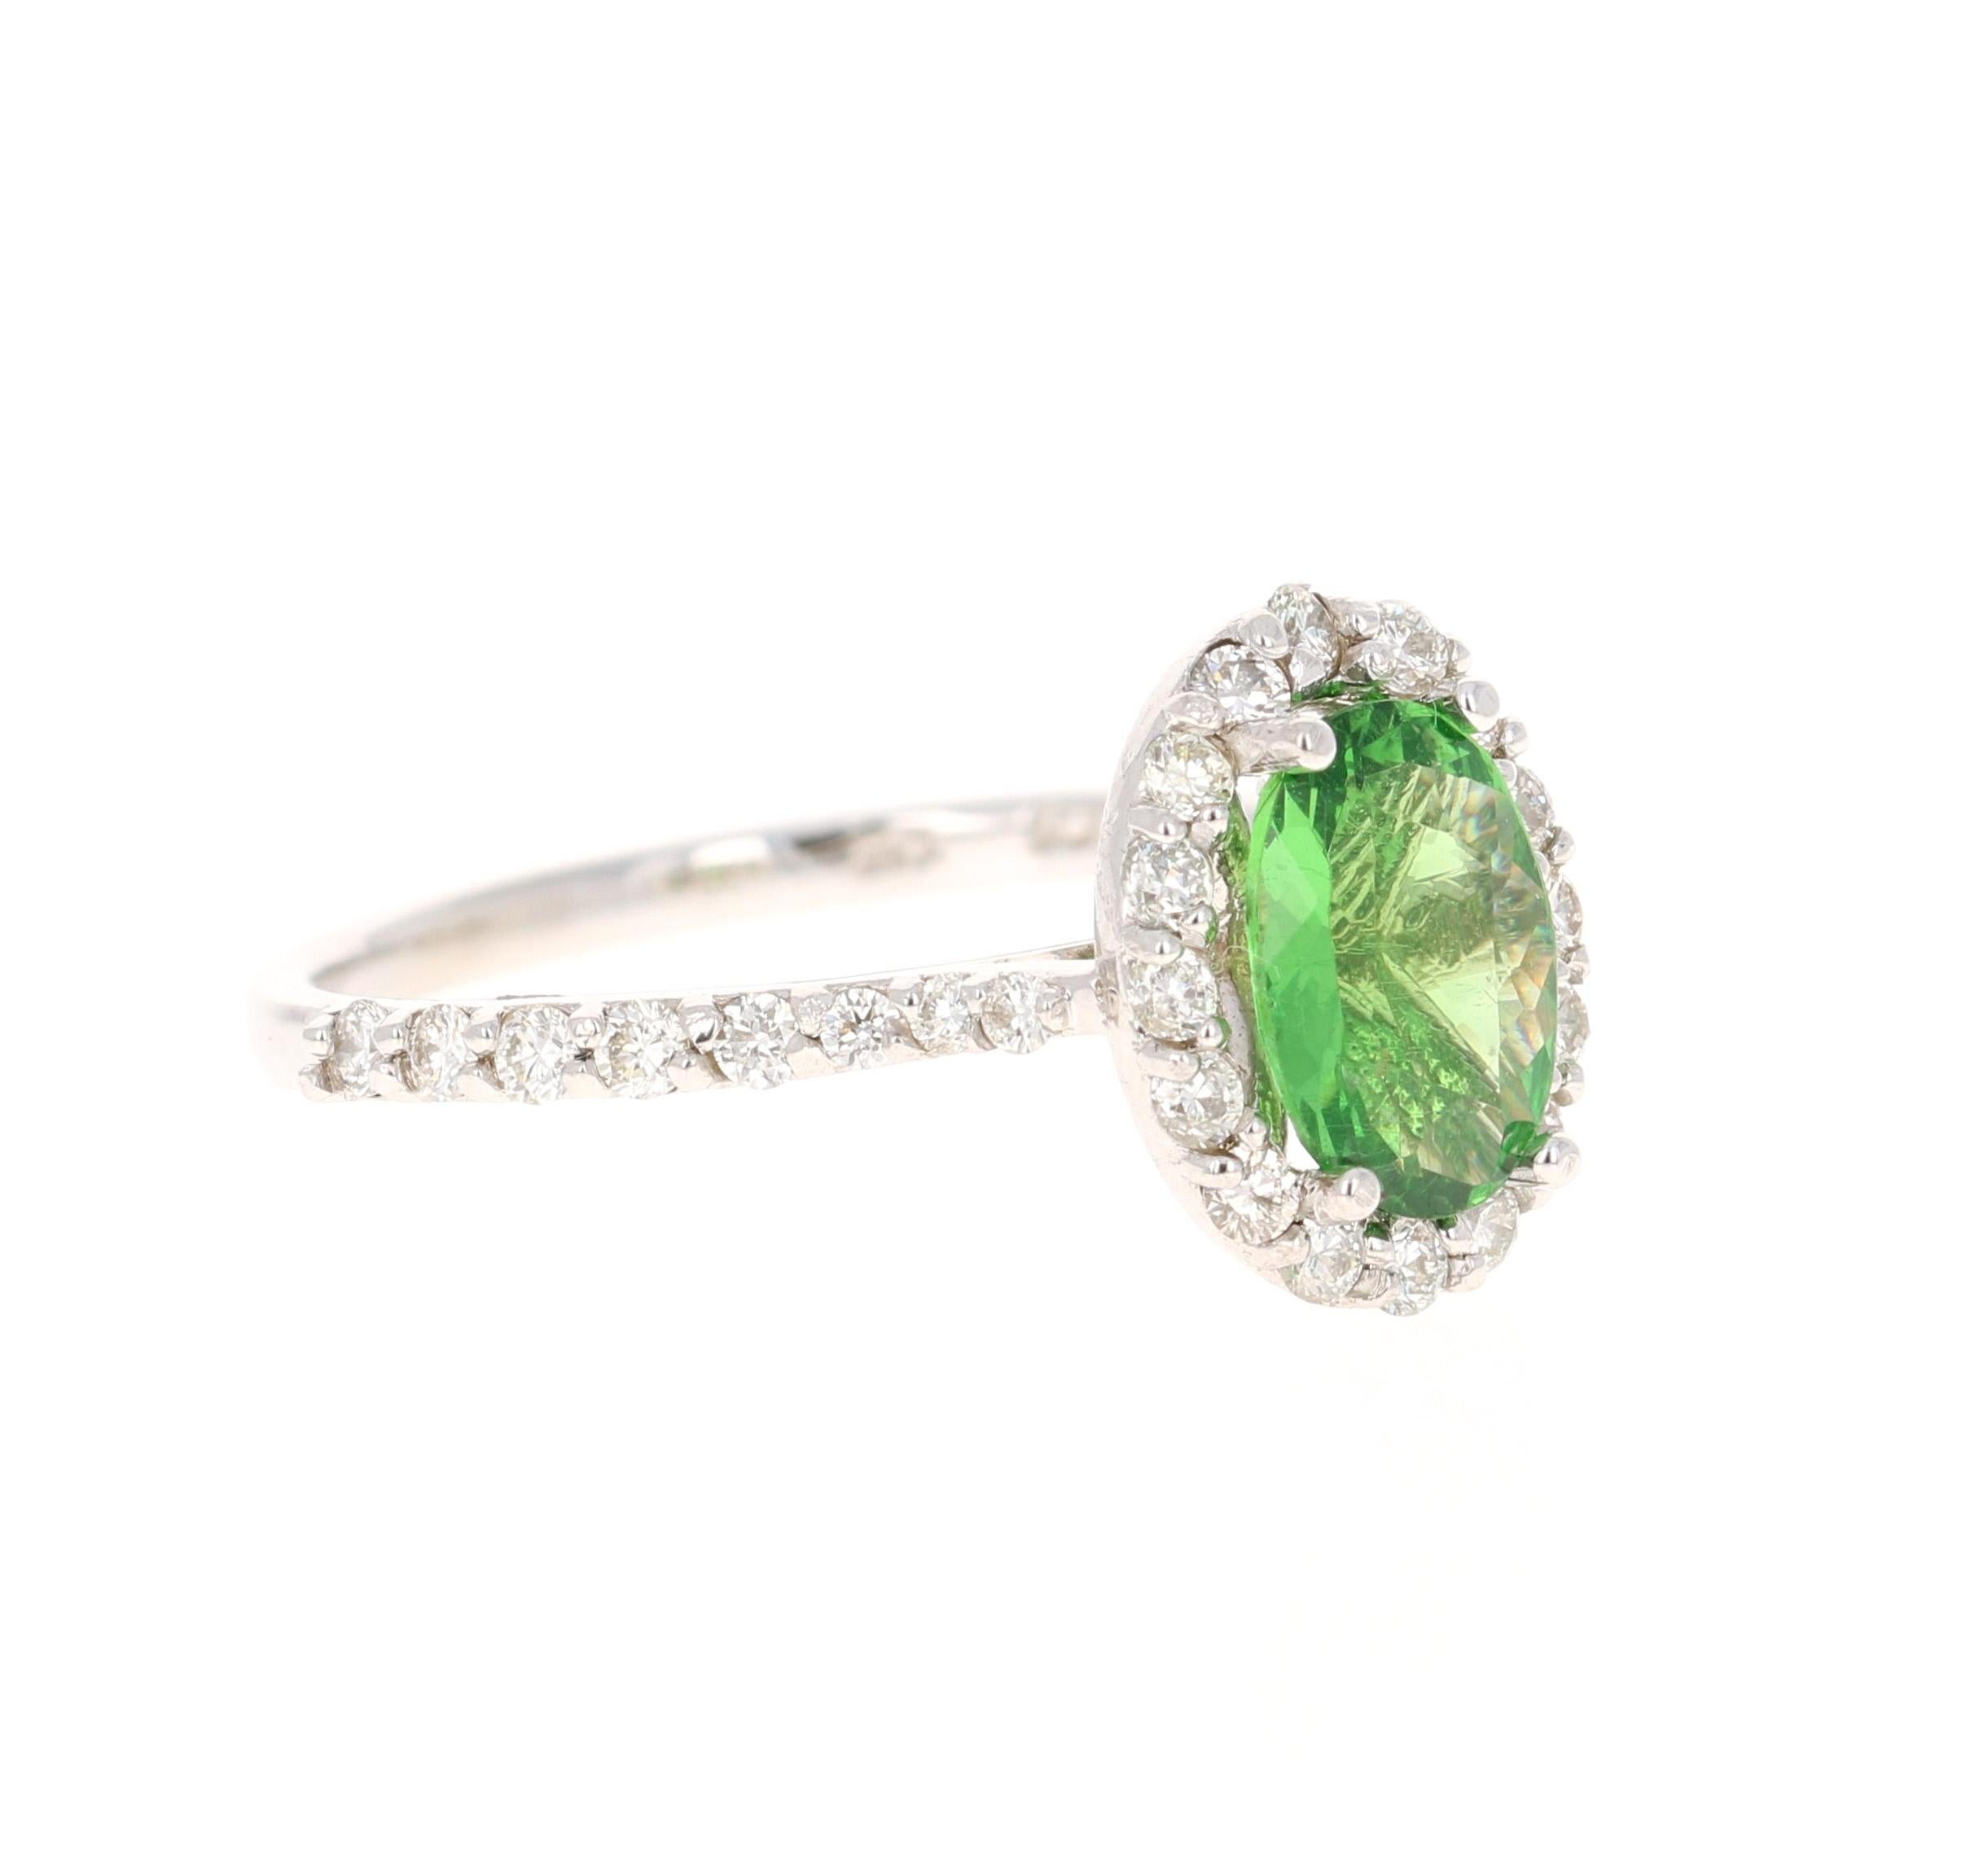 This ring has an Oval Cut Tsavorite which weighs 1.35 carats and is surrounded by a halo of 32 Round Cut Diamonds that weighs 0.59 carats. The total carat weight of the ring is 1.94 carats. The clarity and color of the diamonds are VS-H.

The ring